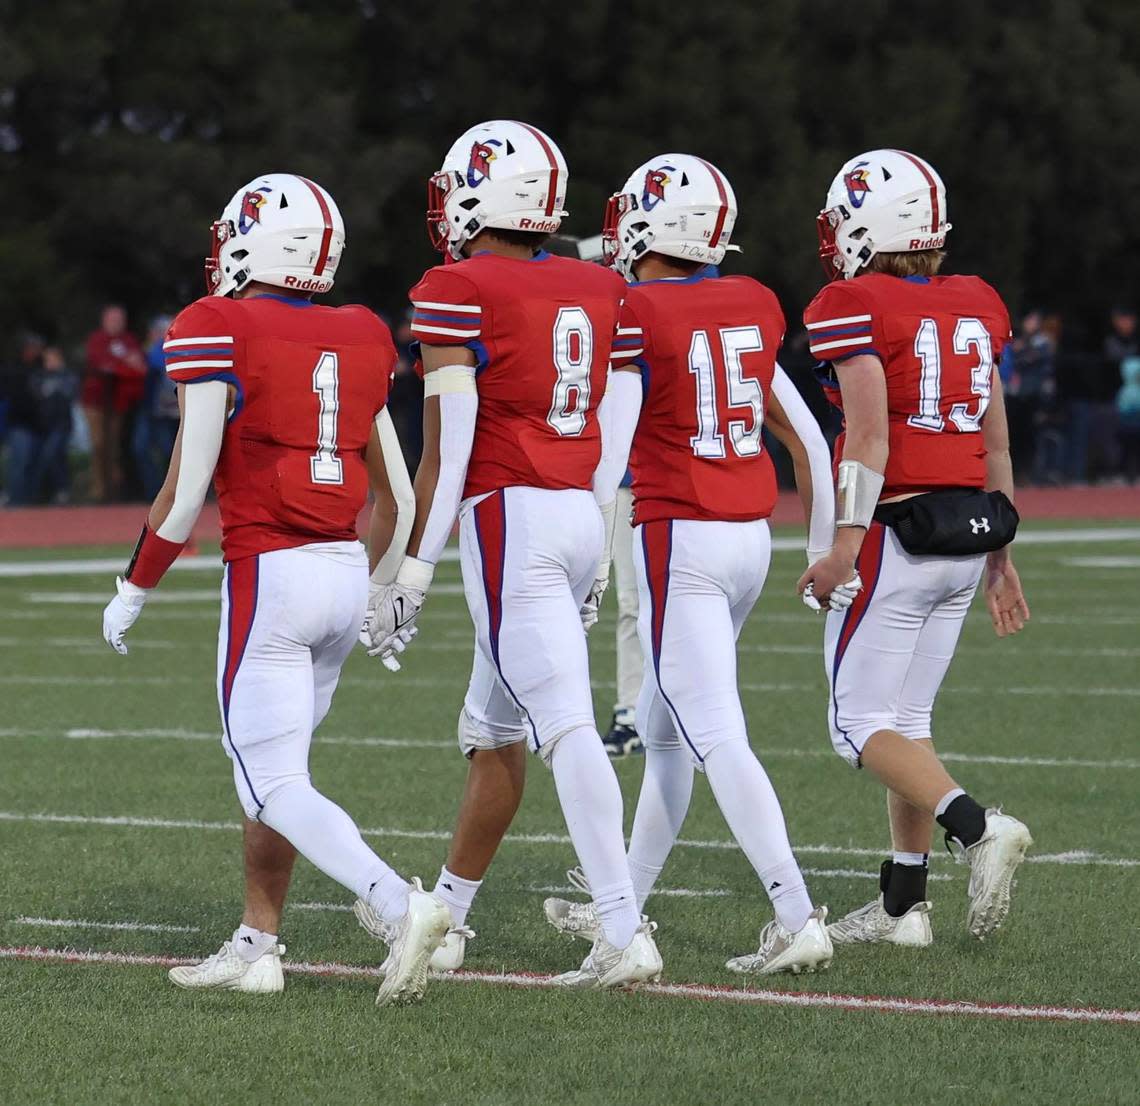 The Cheney senior captains walk onto the field for Friday’s game against Andale.